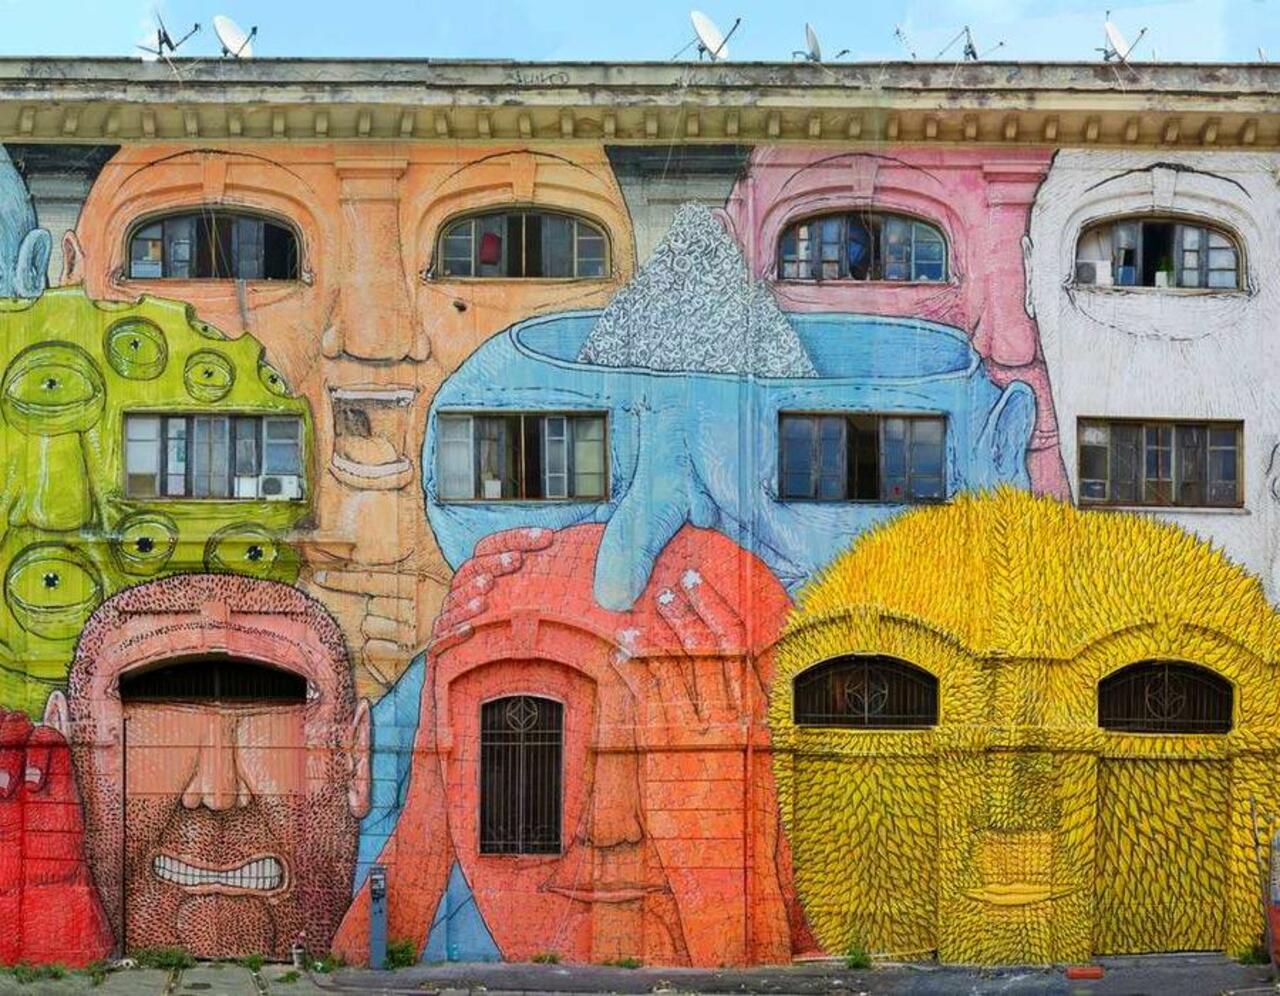 New giant #mural in Rome by the artist Blu. Check out these bizarre faces here: http://bit.ly/1xWLY4U #streetart https://t.co/Jkf0z9myF9